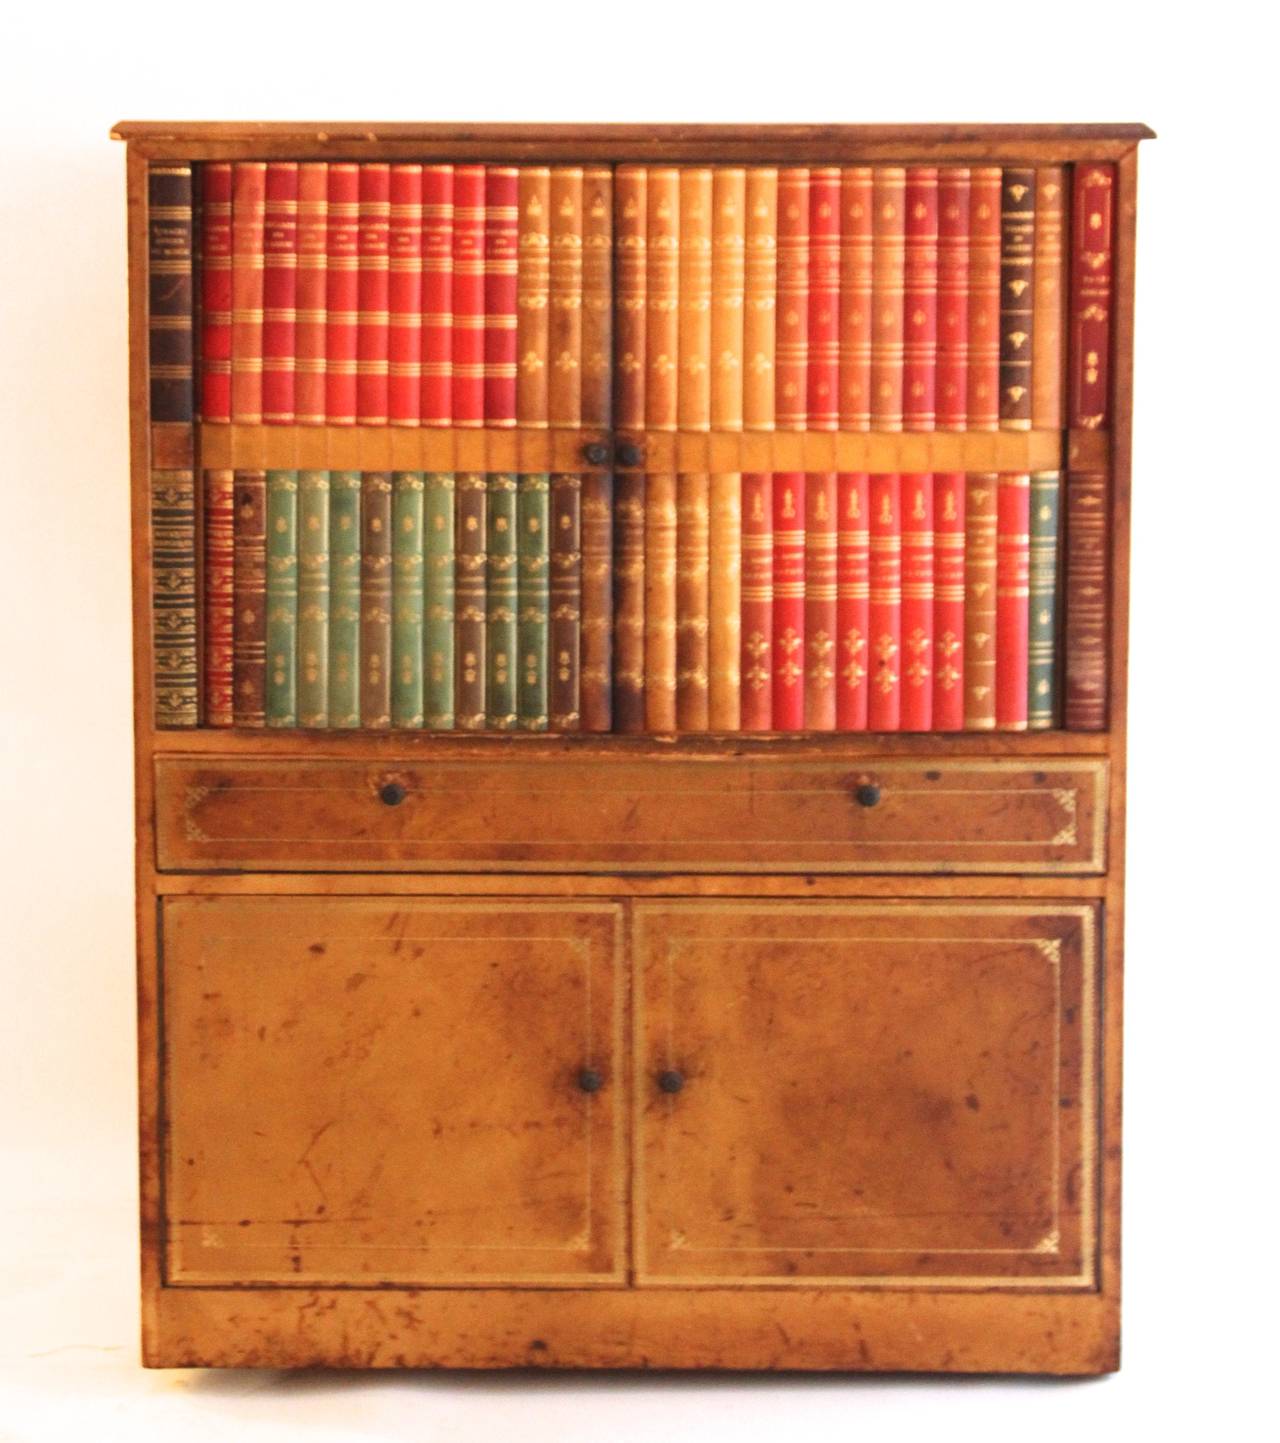 Decor furniture books Buffet,
Wooden structure covered with tawny leather books,
Circa 1970, France.
Height: 127 cm, width 67 cm,
depth: 67 cm, length: 99 cm.